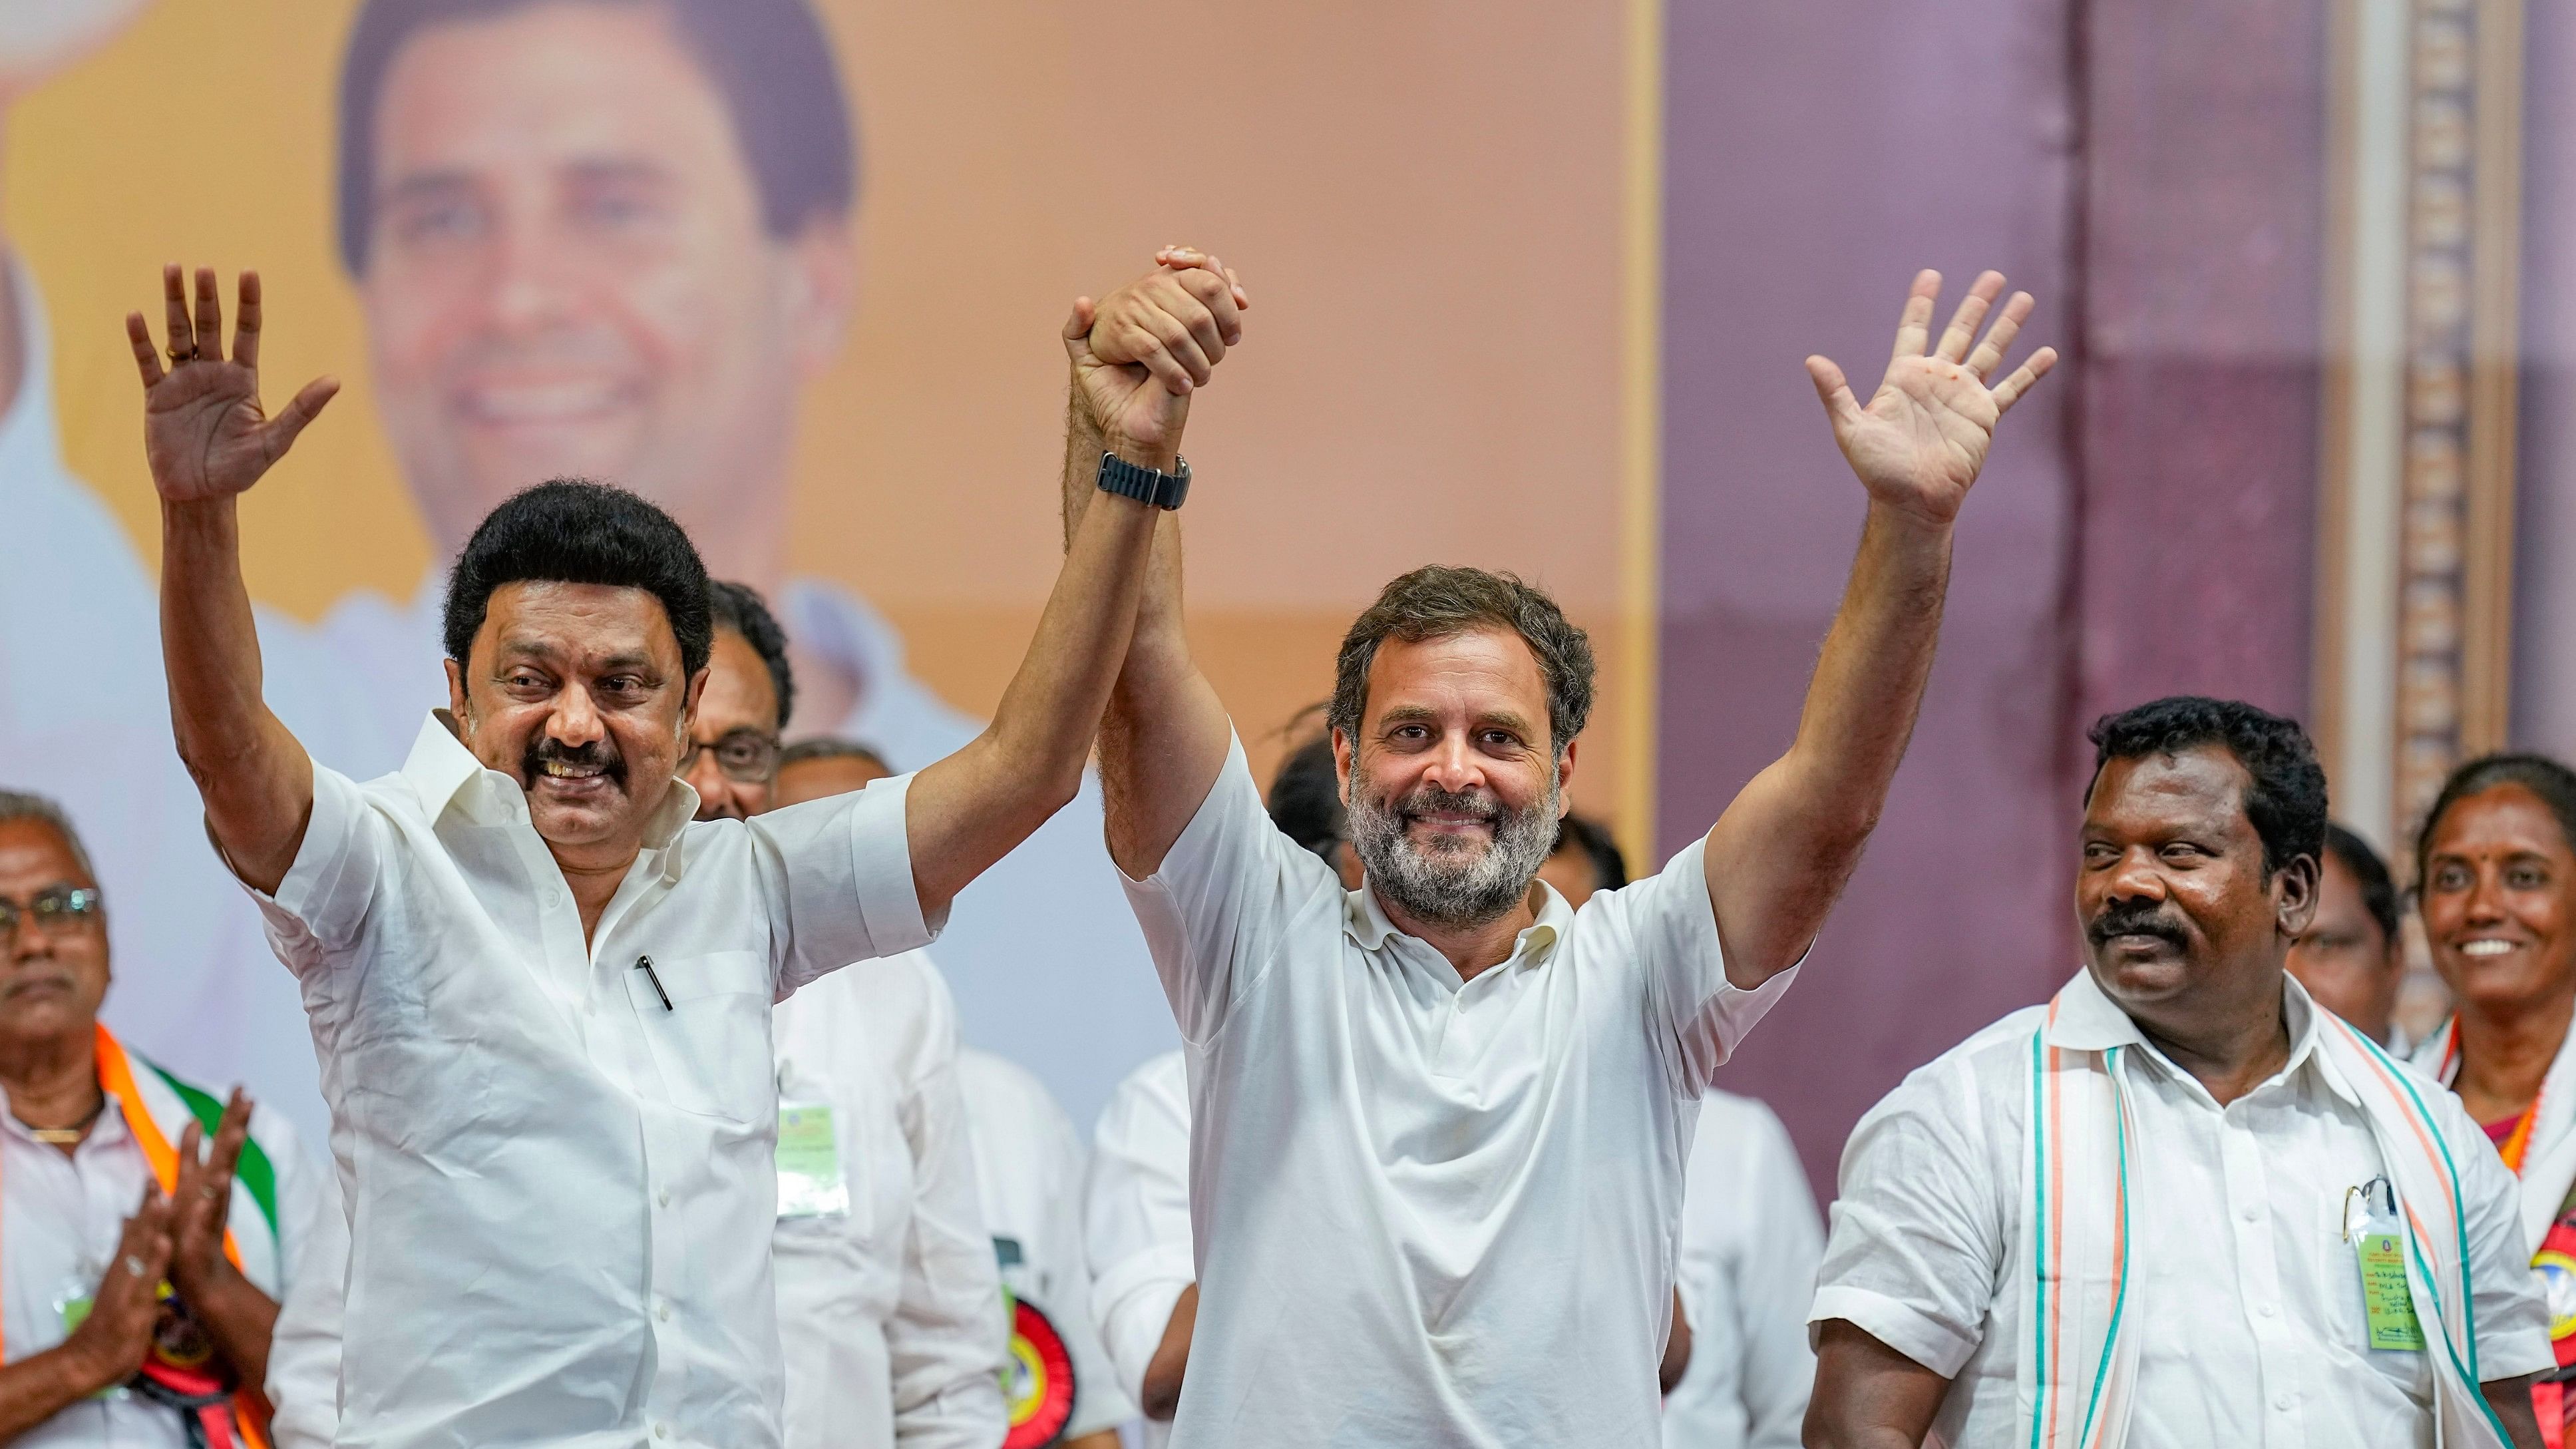 <div class="paragraphs"><p>DMK chief and Tamil Nadu Chief Minister M K Stalin and Congress leader Rahul Gandhi wave at supporters during a public meeting, ahead of the Lok Sabha elections, in Coimbatore.</p></div>